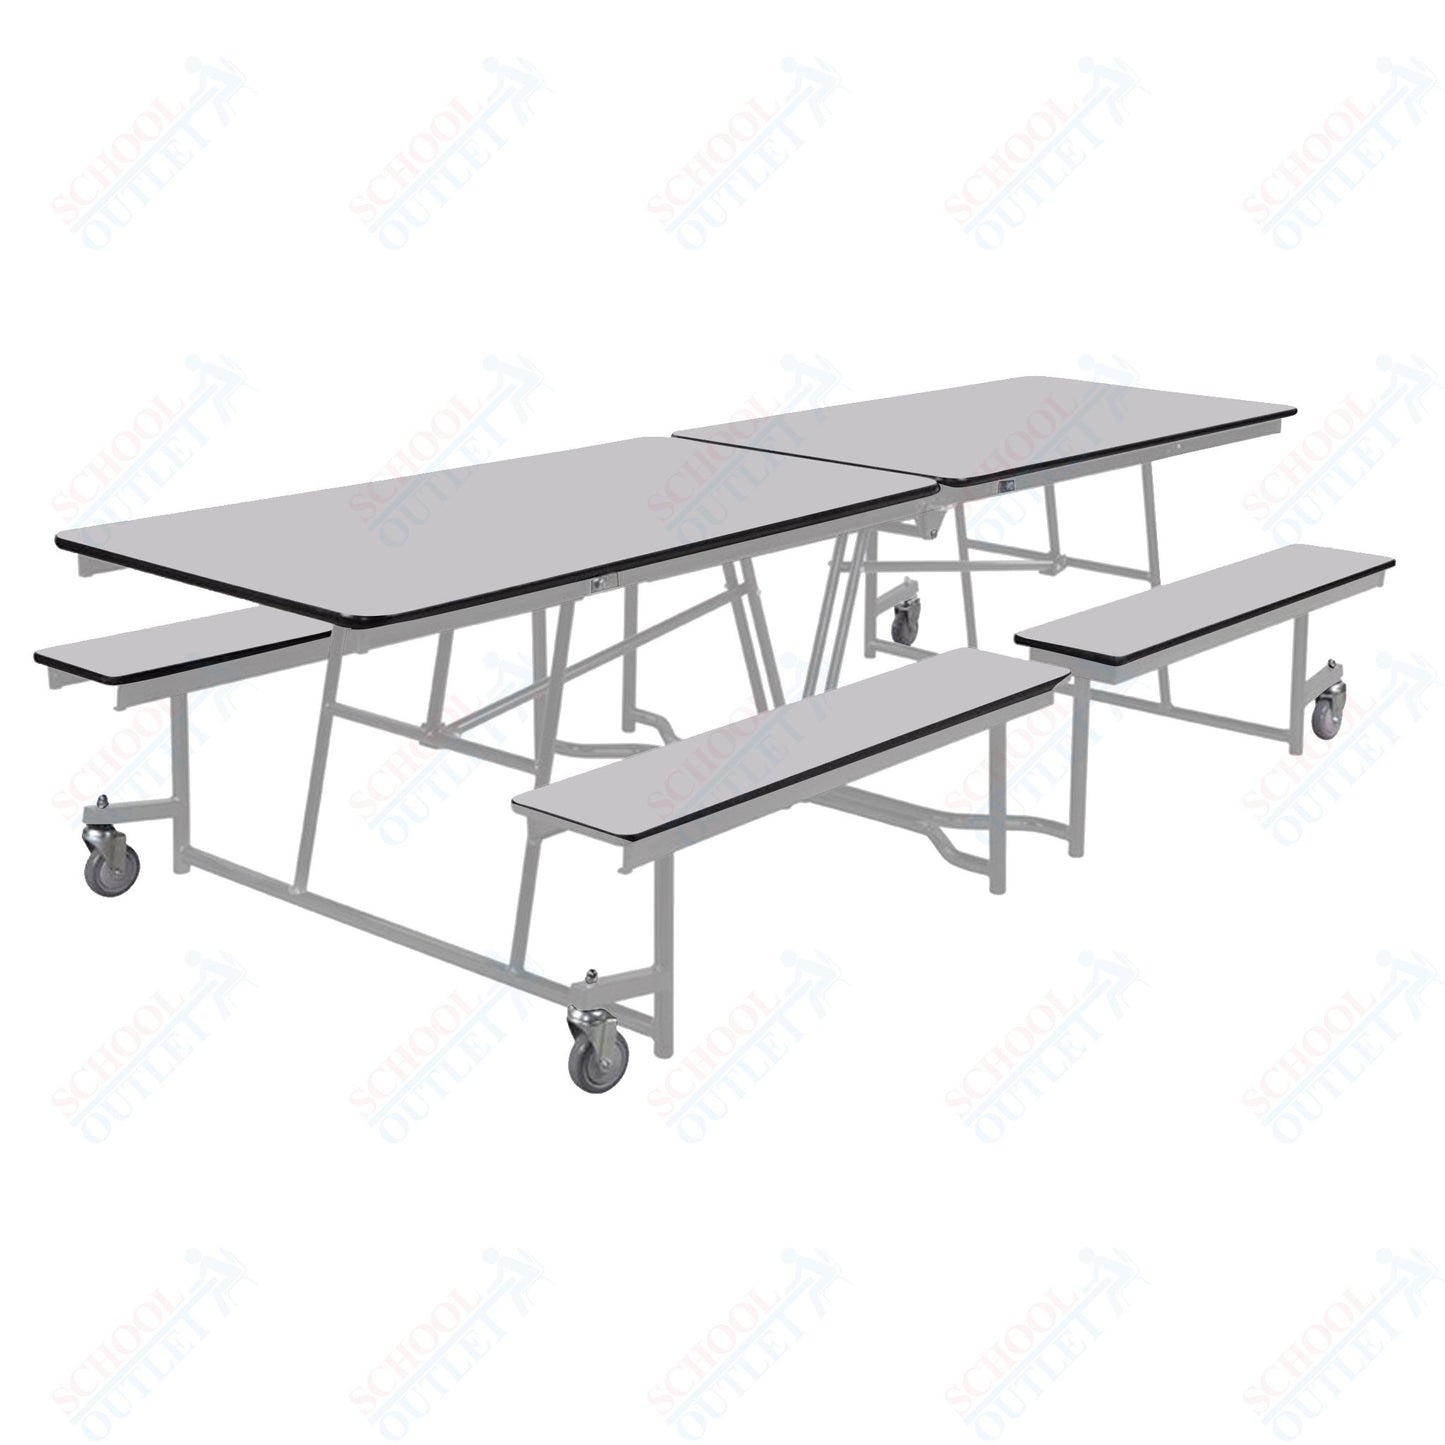 NPS Mobile Cafeteria Table - 30" W x 10' L - Seats 8-12 (National Public Seating NPS-MTFB10)